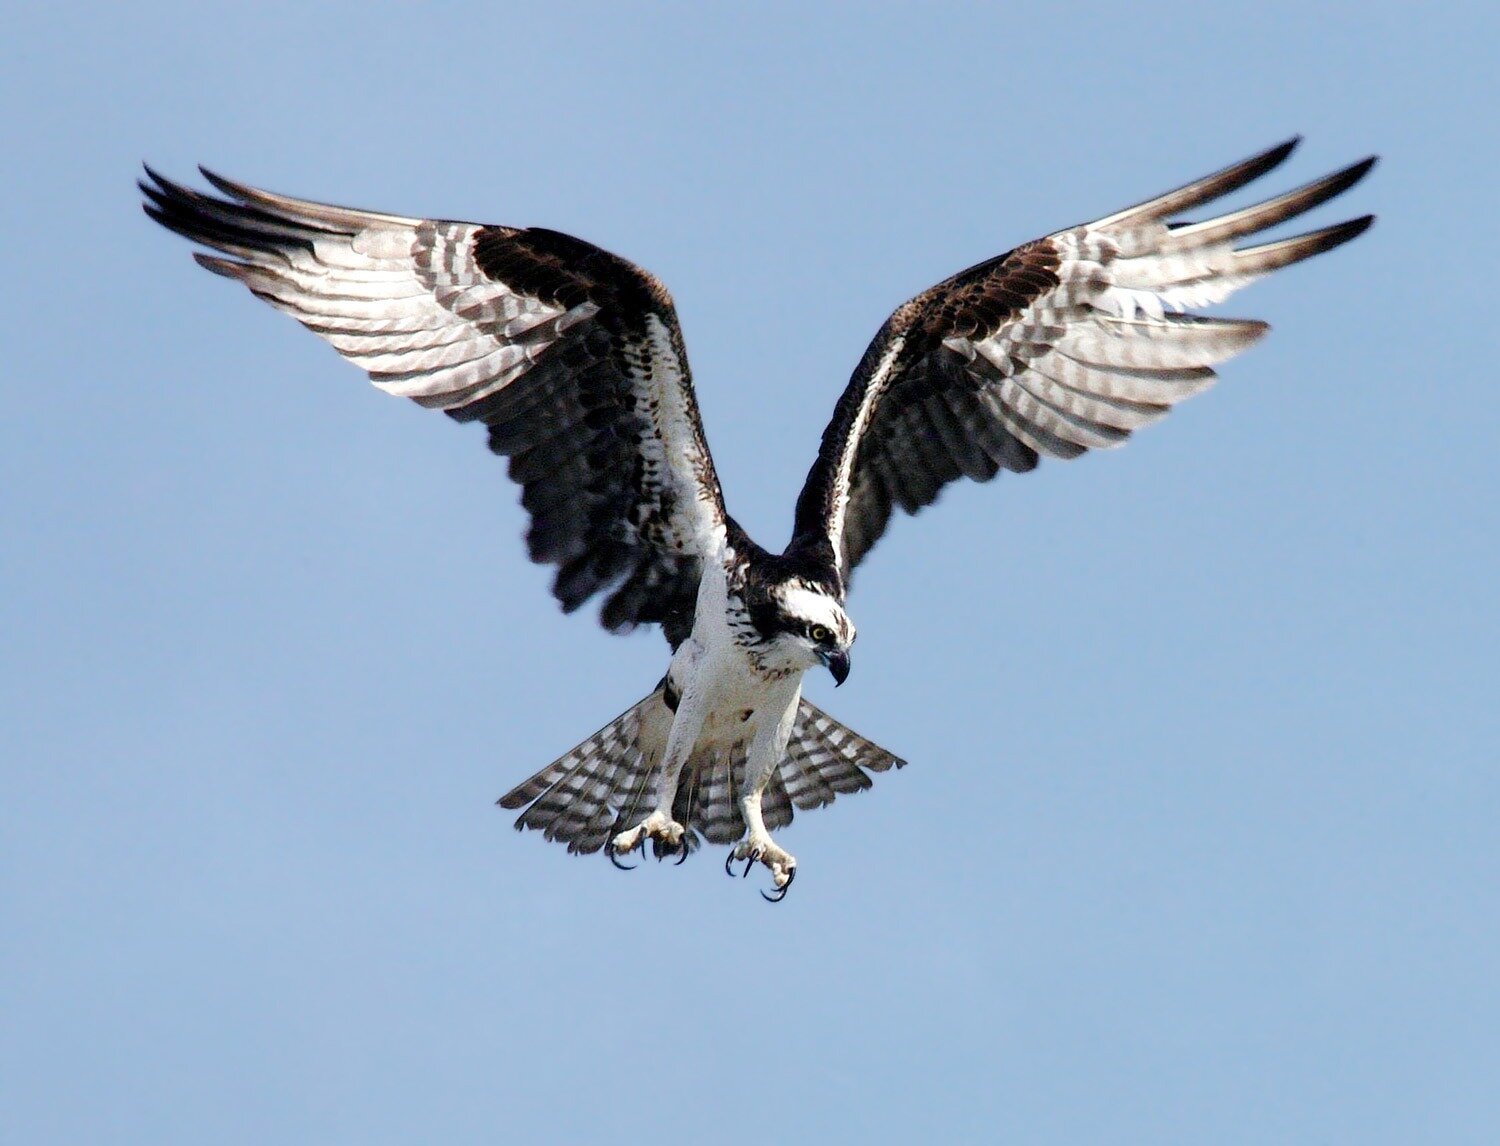 With nests on telephone poles, once-endangered osprey are flying high in Illinois